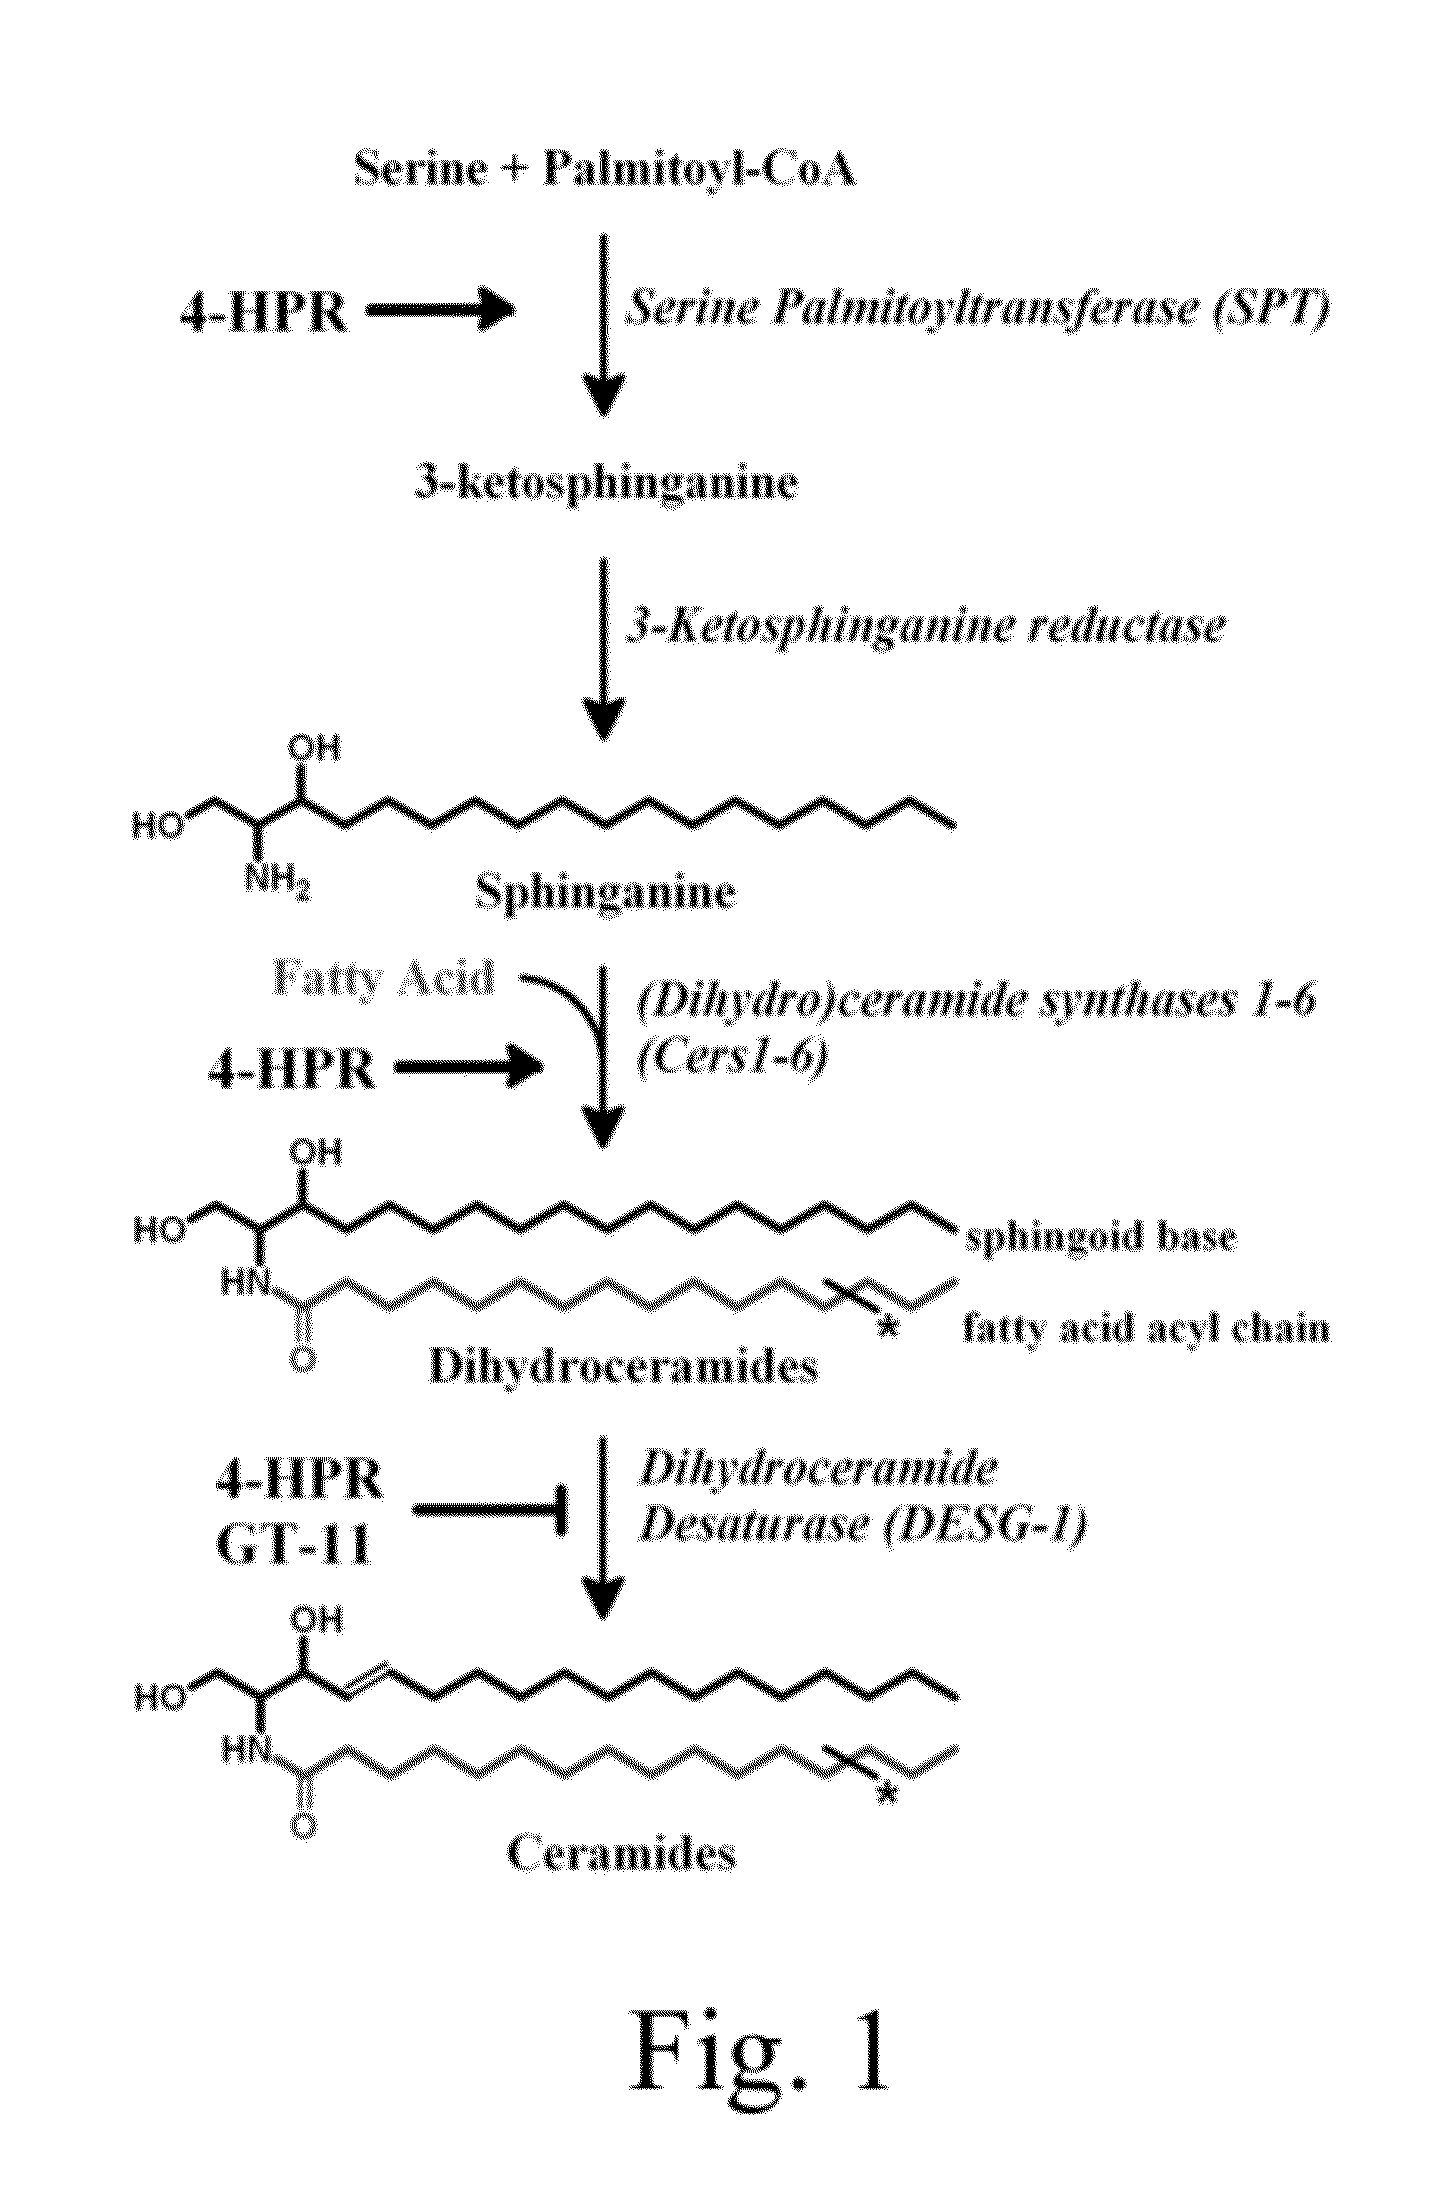 Method for Increasing the Production of a Specific ACYL-Chain Dihydroceramide(s) for Improving the Effectiveness of Cancer Treatments